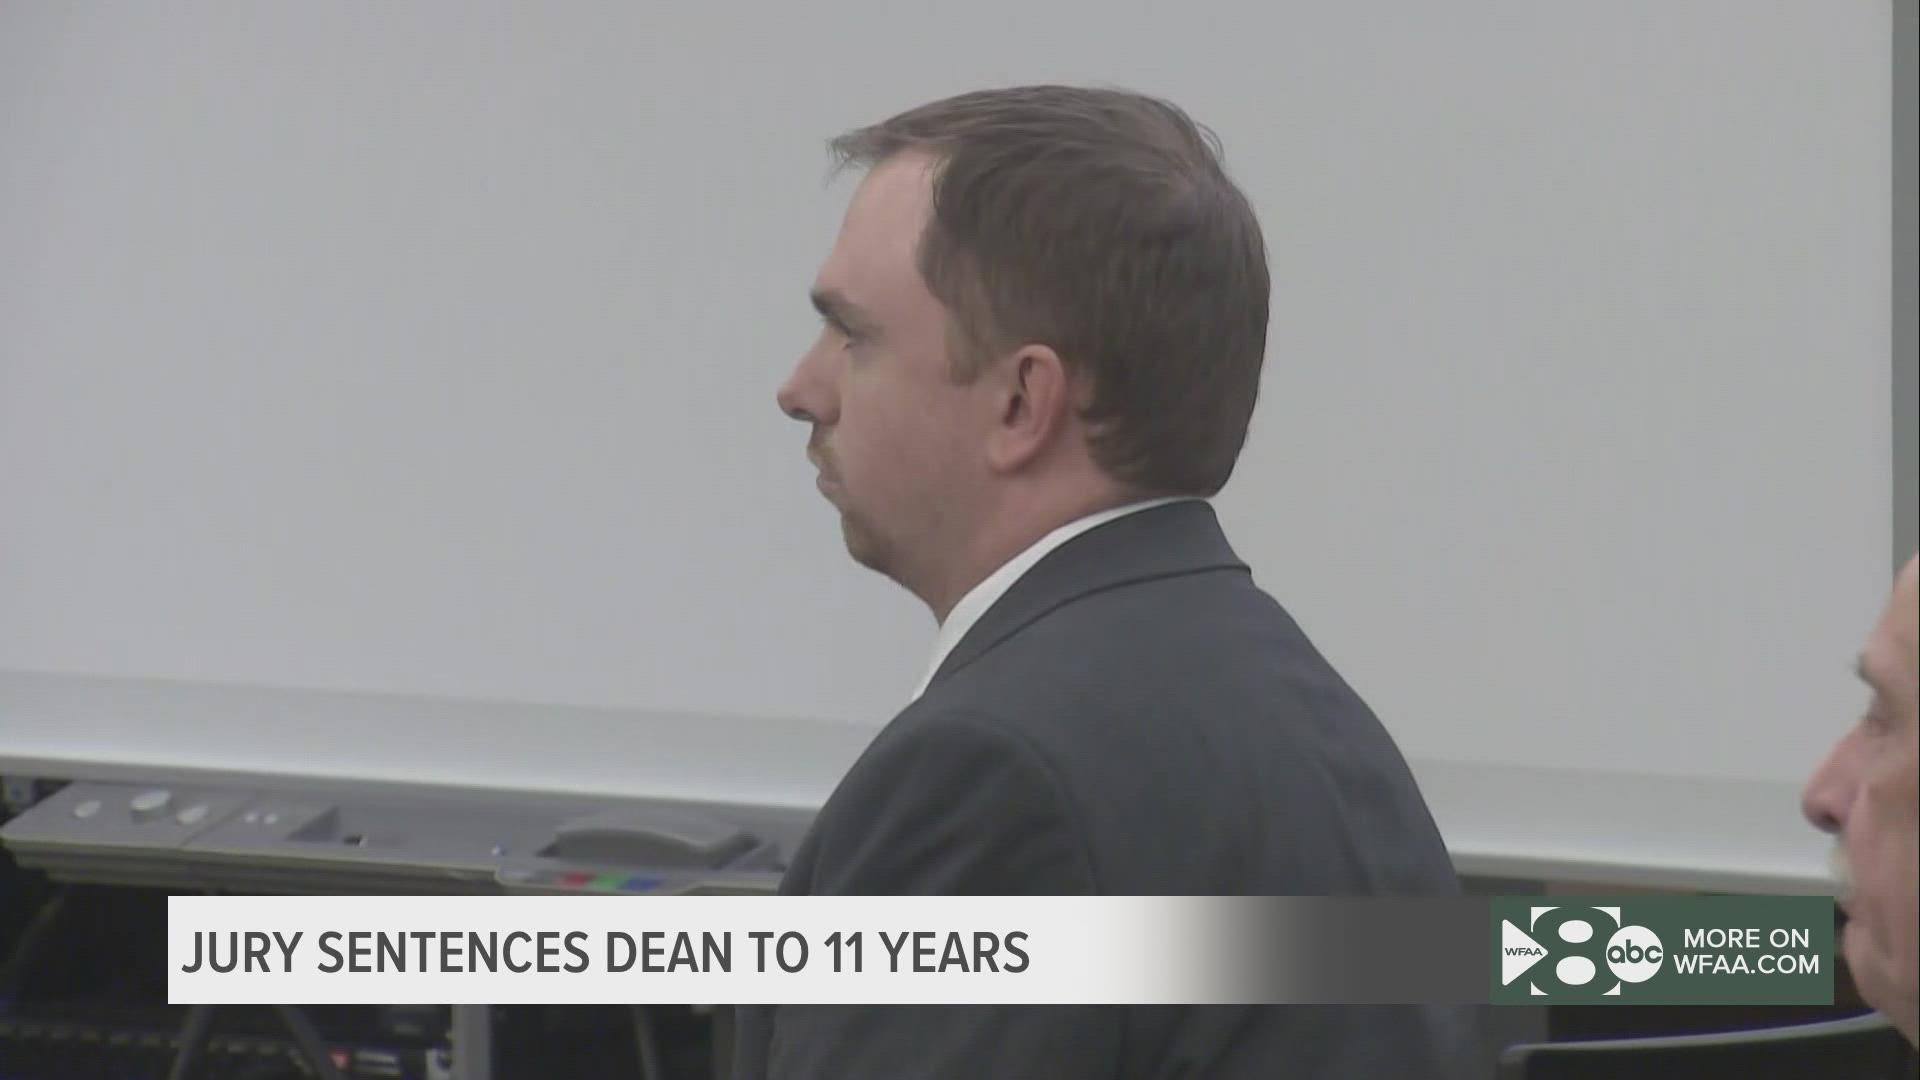 Dean was found guilty of manslaughter in the 2019 shooting death of Atatiana Jefferson.